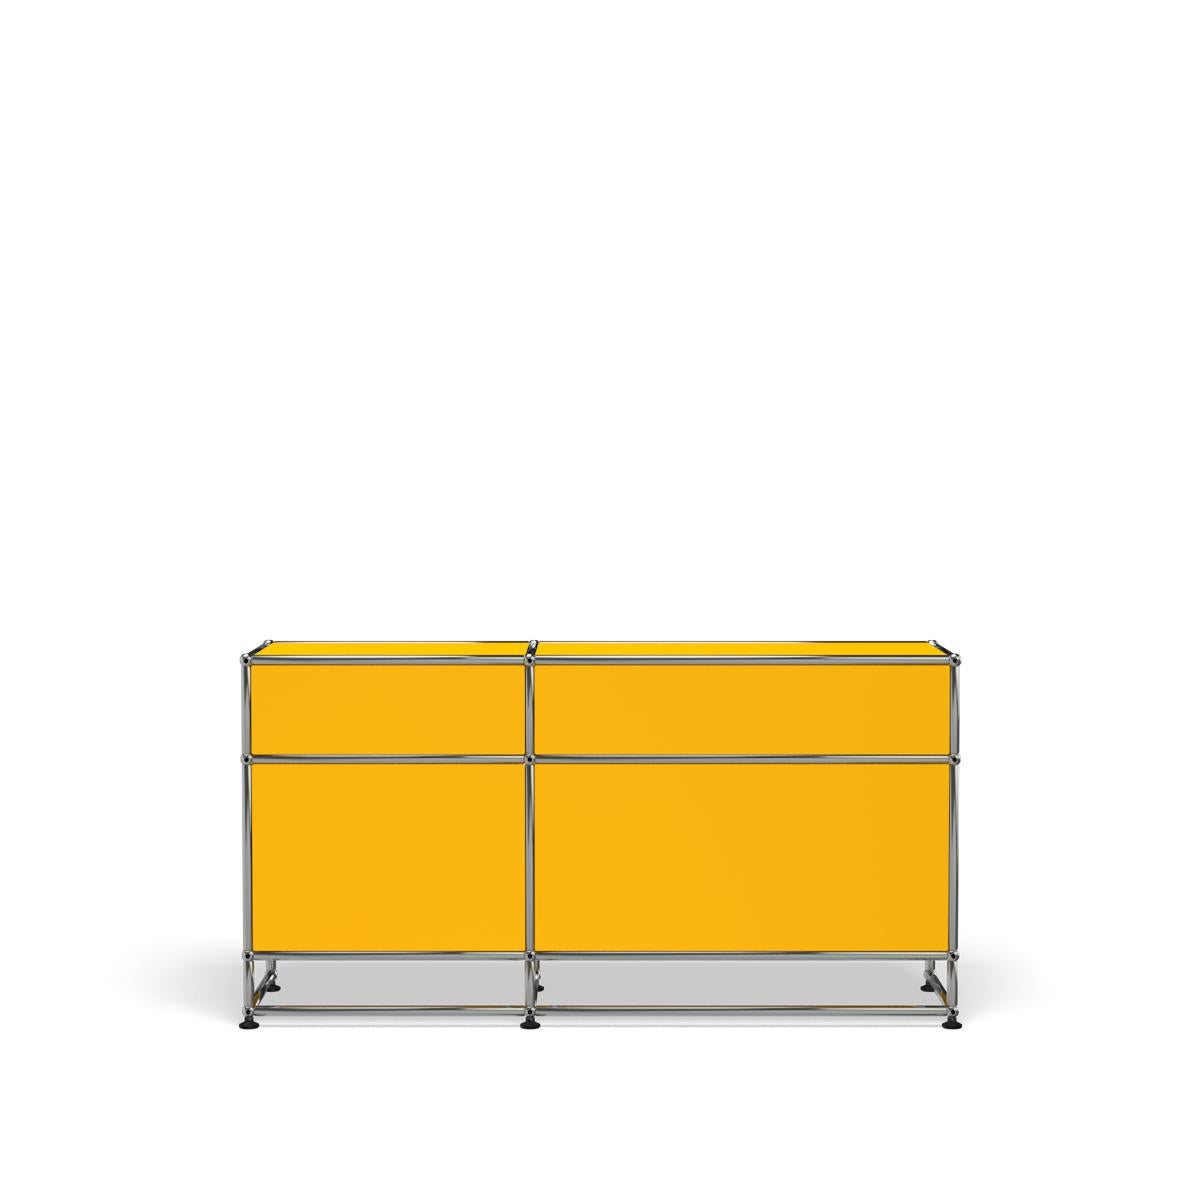 For Sale: Yellow (Golden Yellow) USM Haller Media O3 Storage System 4